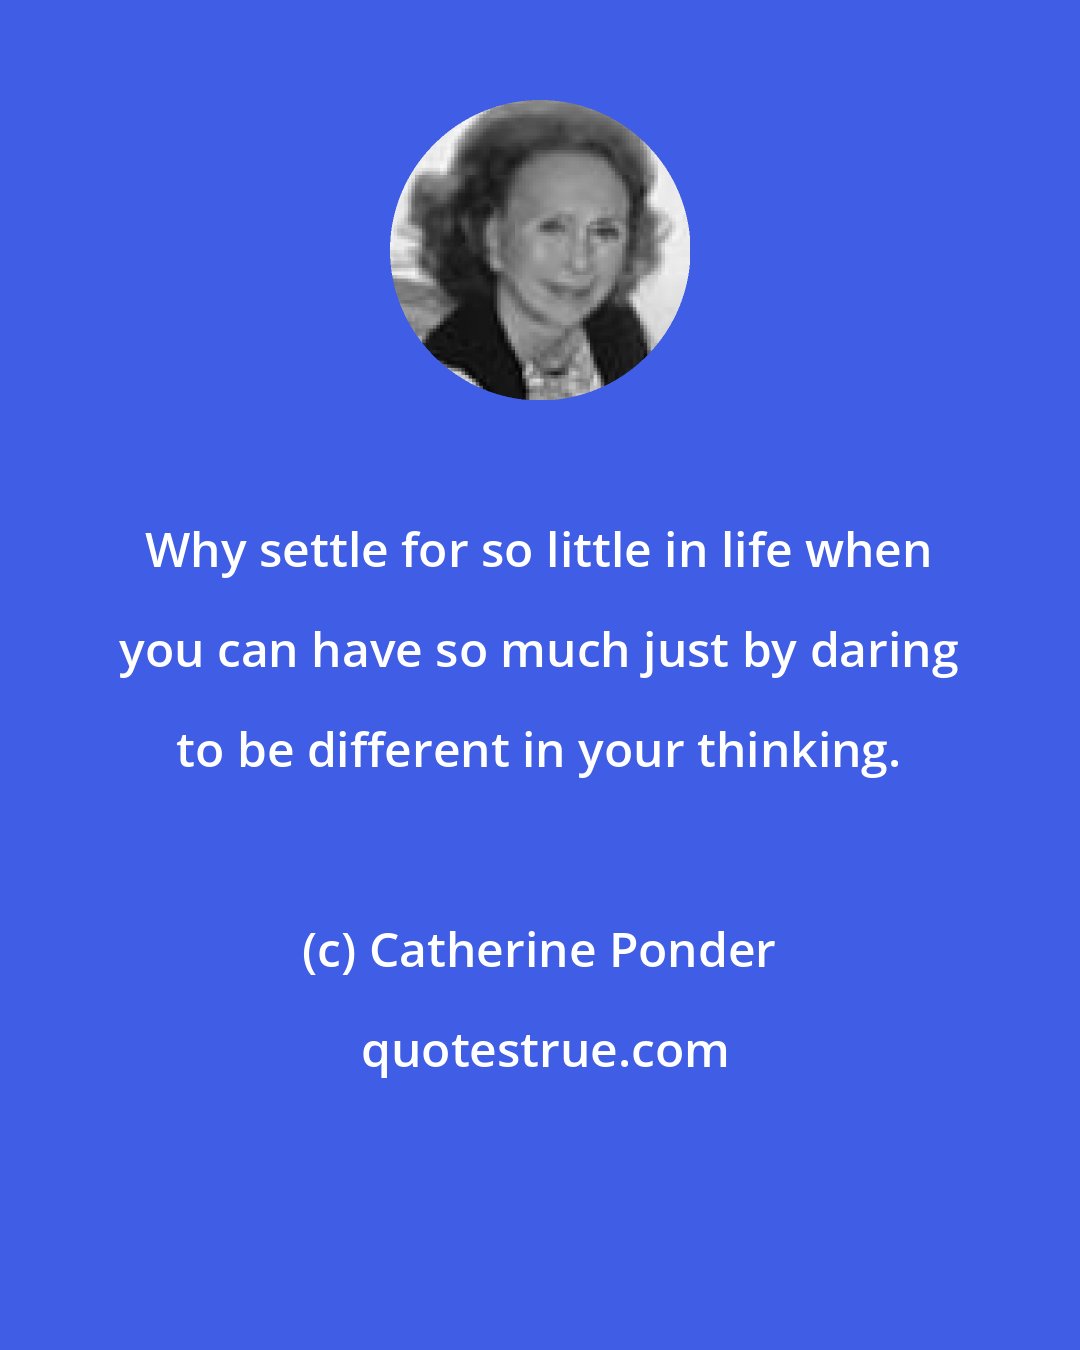 Catherine Ponder: Why settle for so little in life when you can have so much just by daring to be different in your thinking.